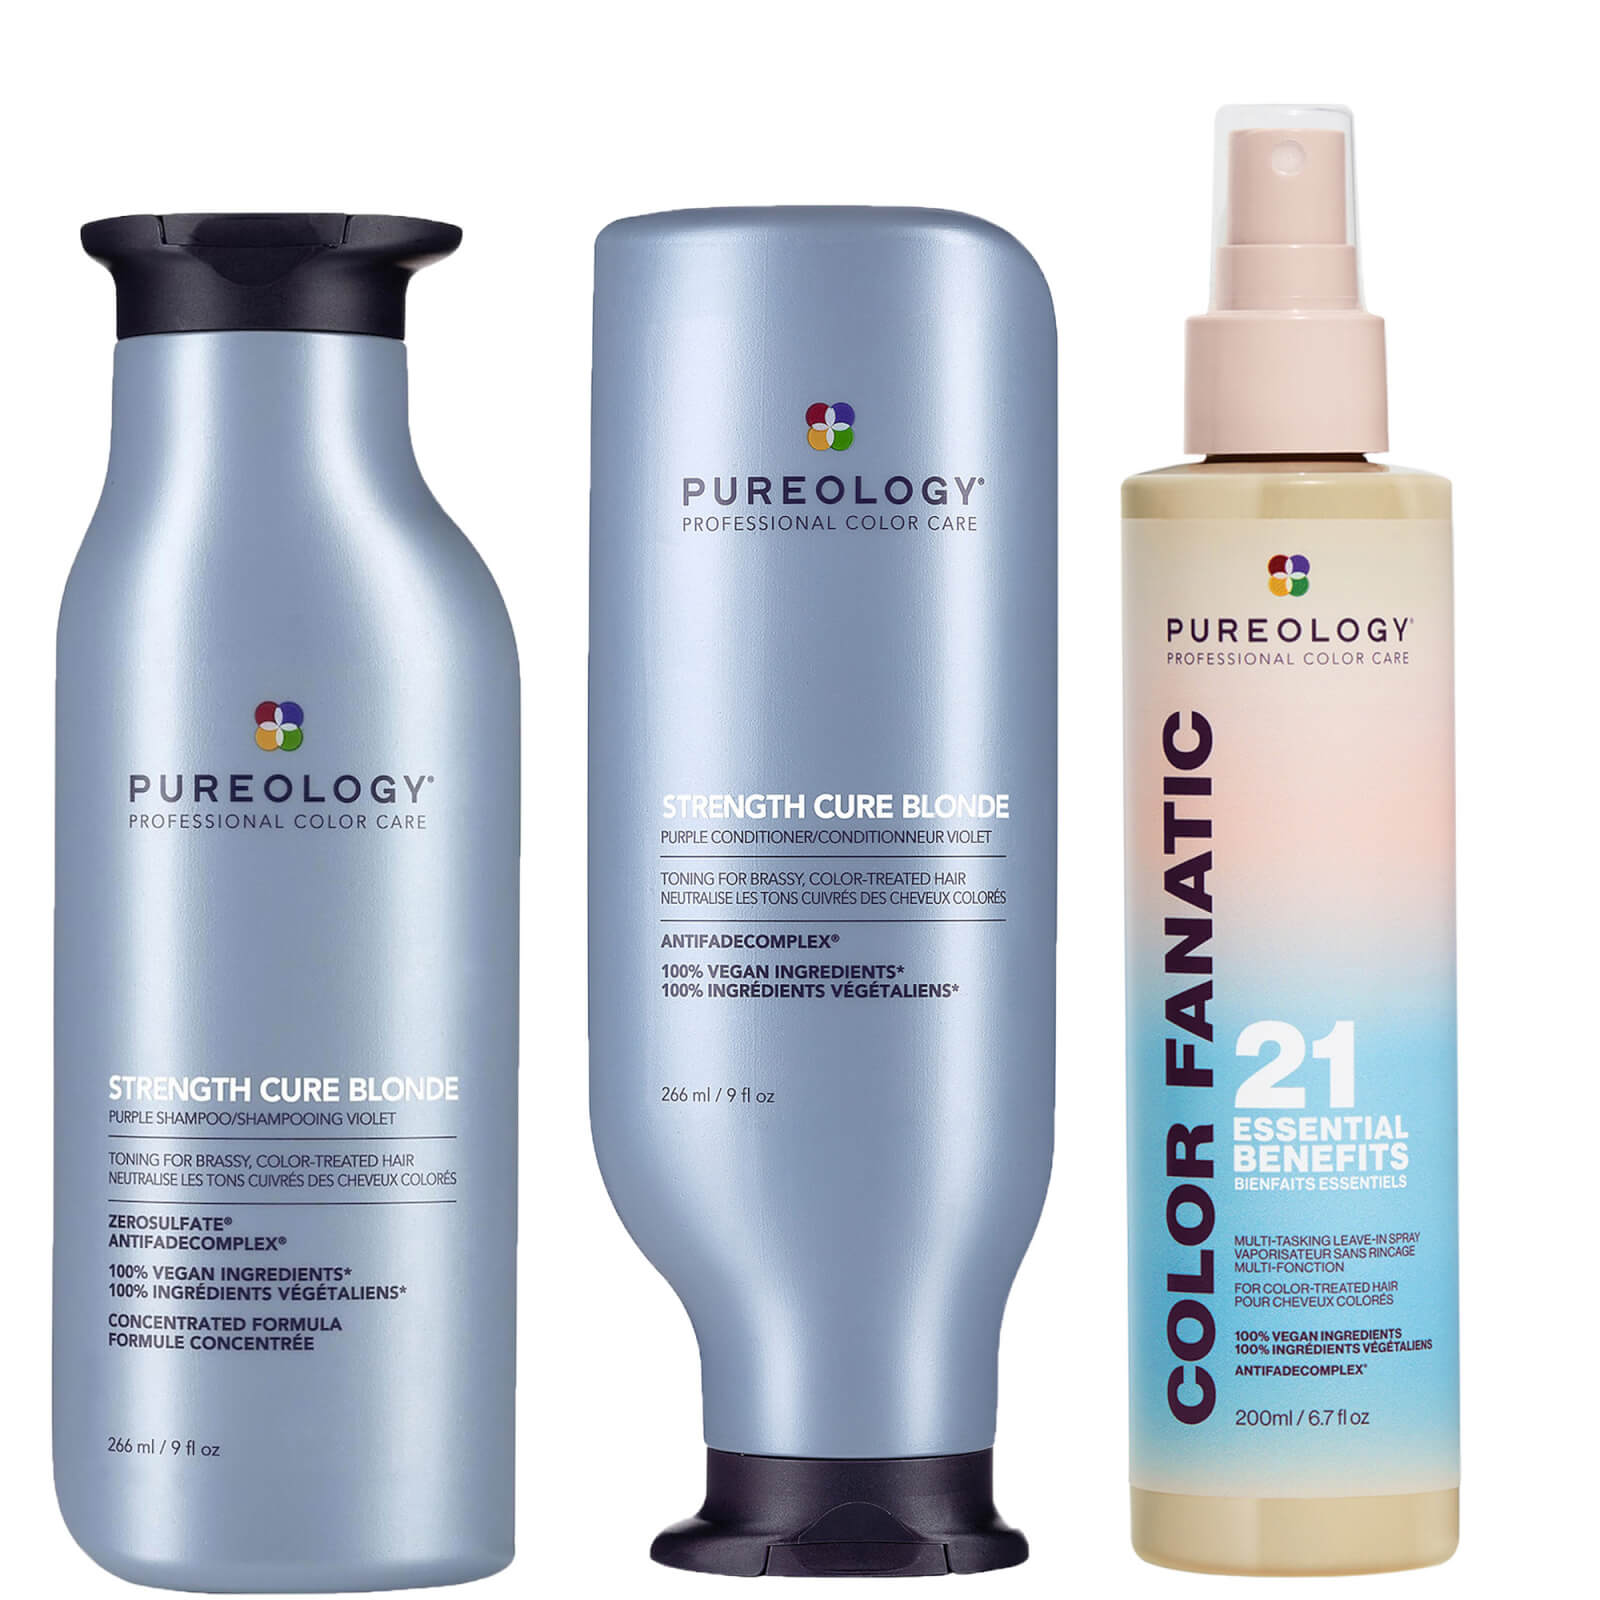 Pureology Strength Cure Blonde Purple Shampoo, Conditioner and Color Fanatic Spray Routine for Tonin